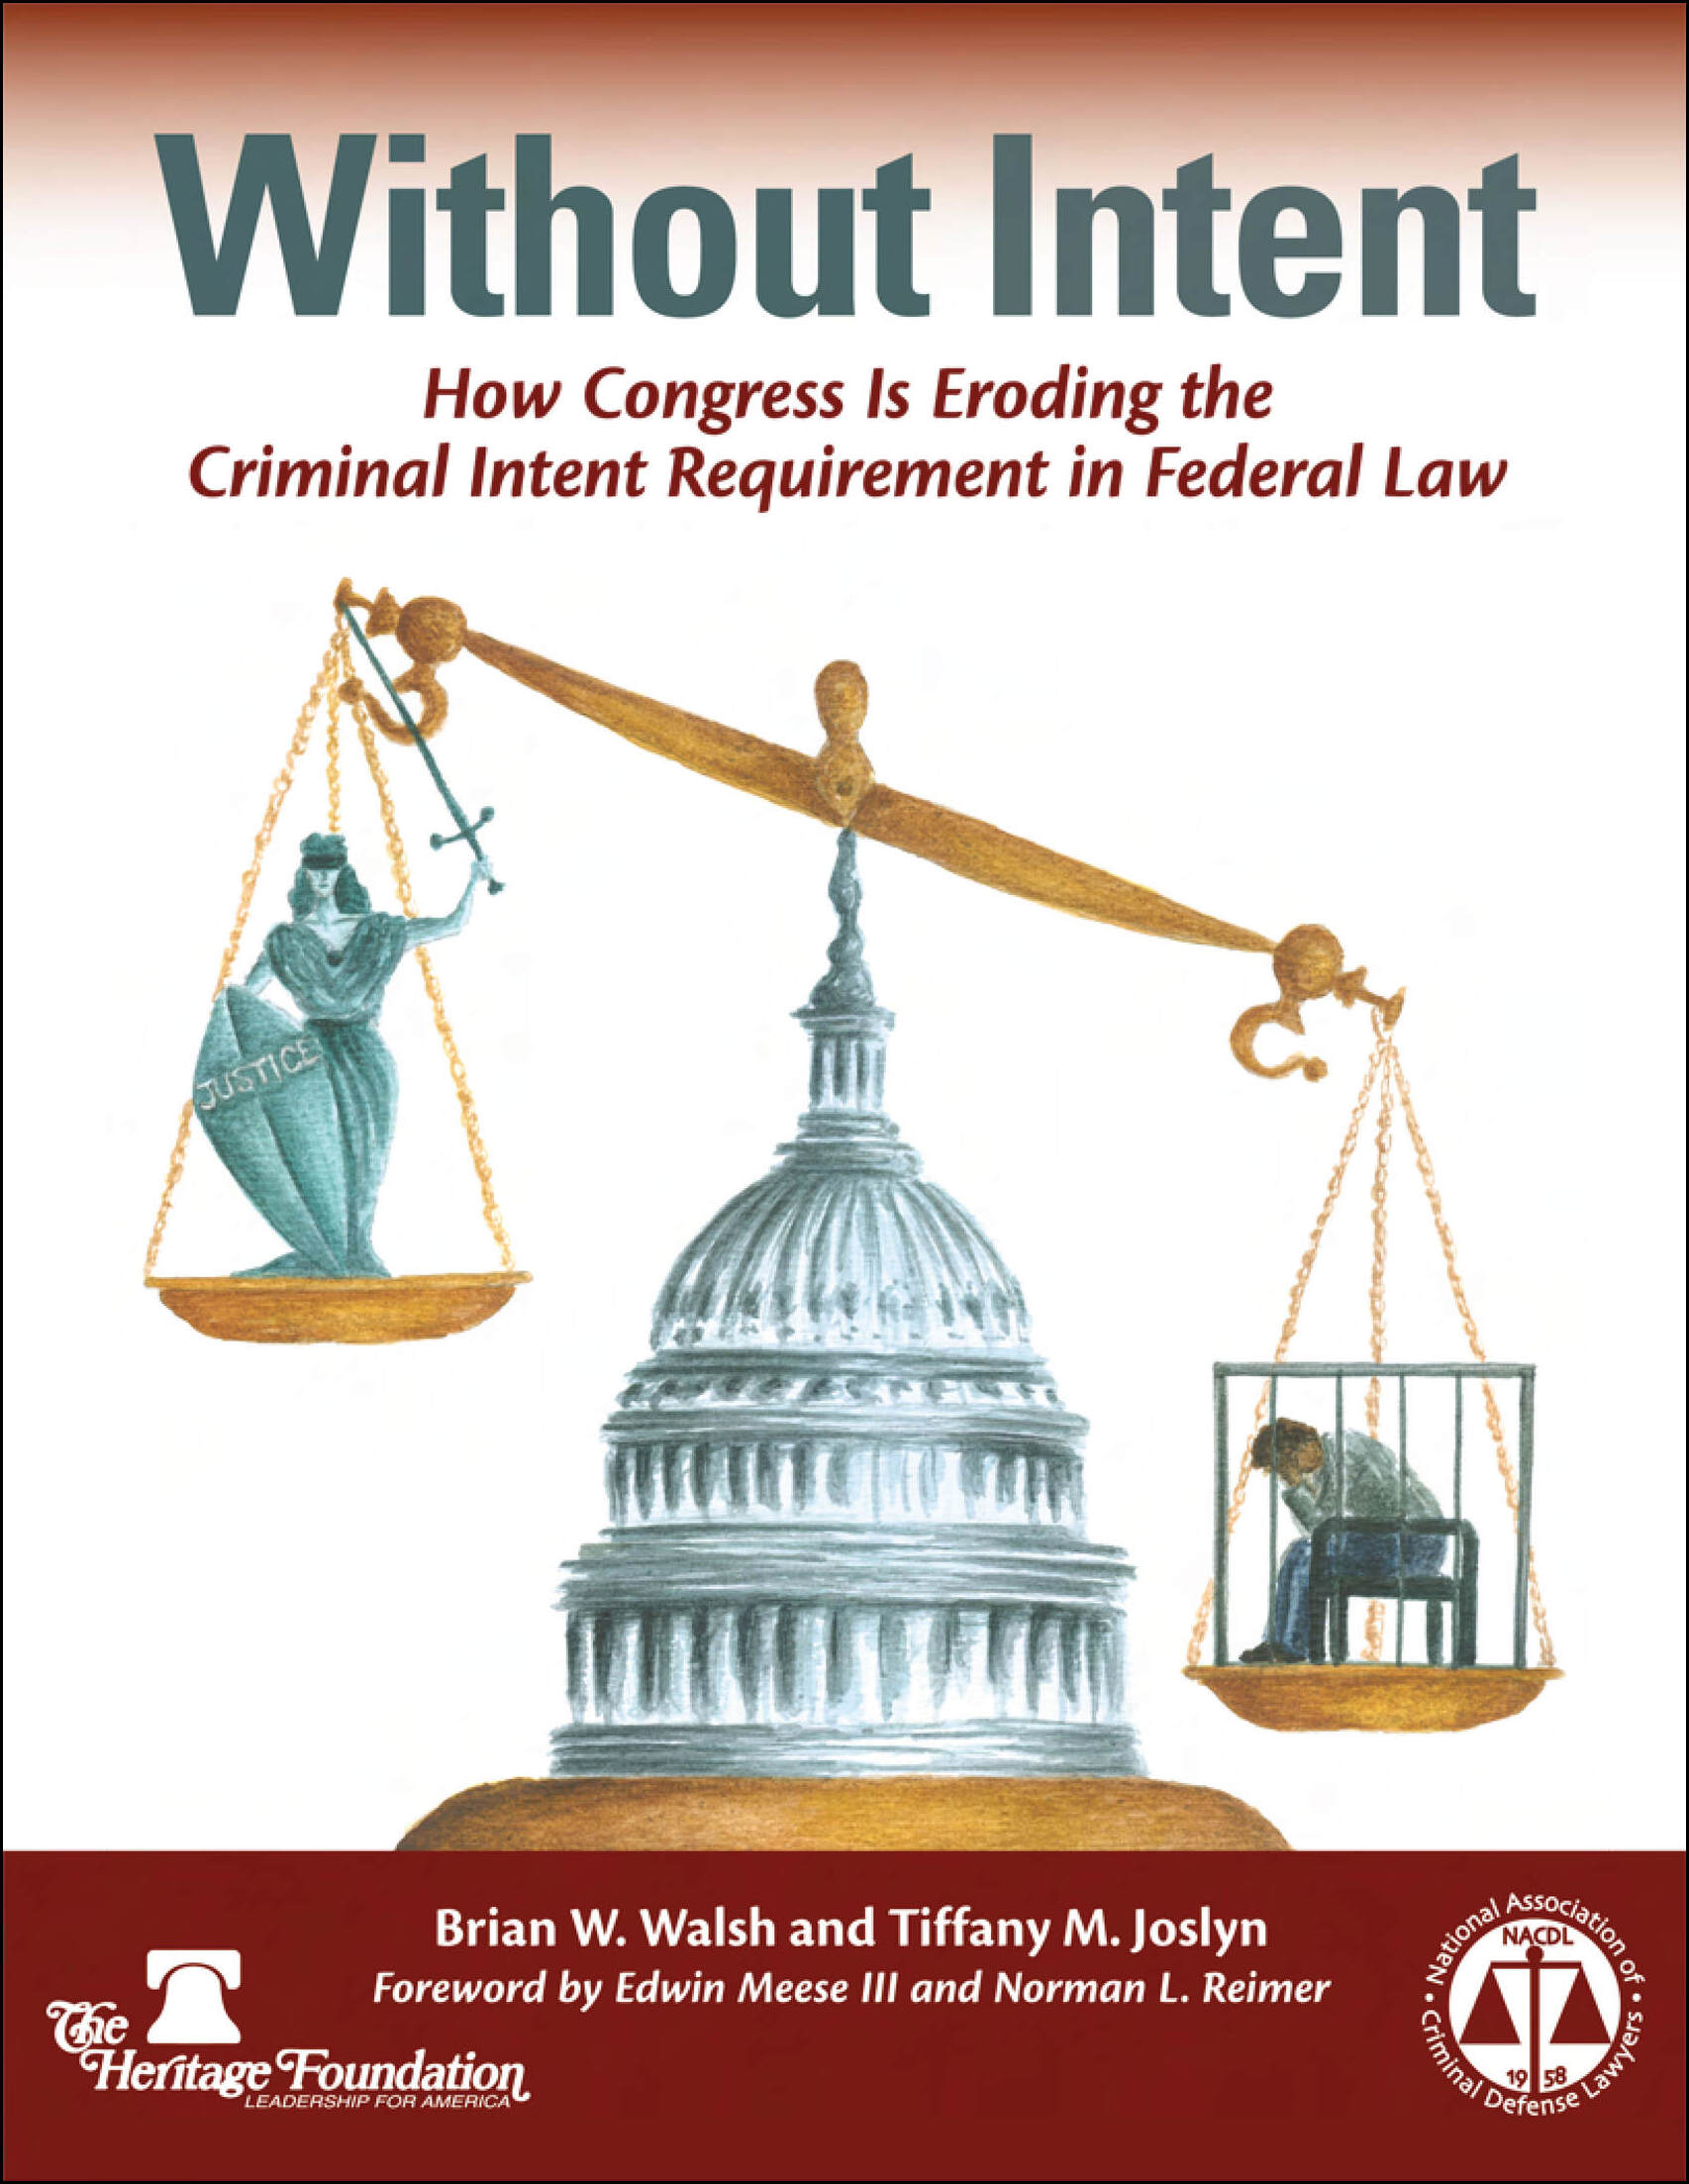 Cover for NACDL report Without Intent: How Congress Is Eroding the Criminal Intent Requirement in Federal Law